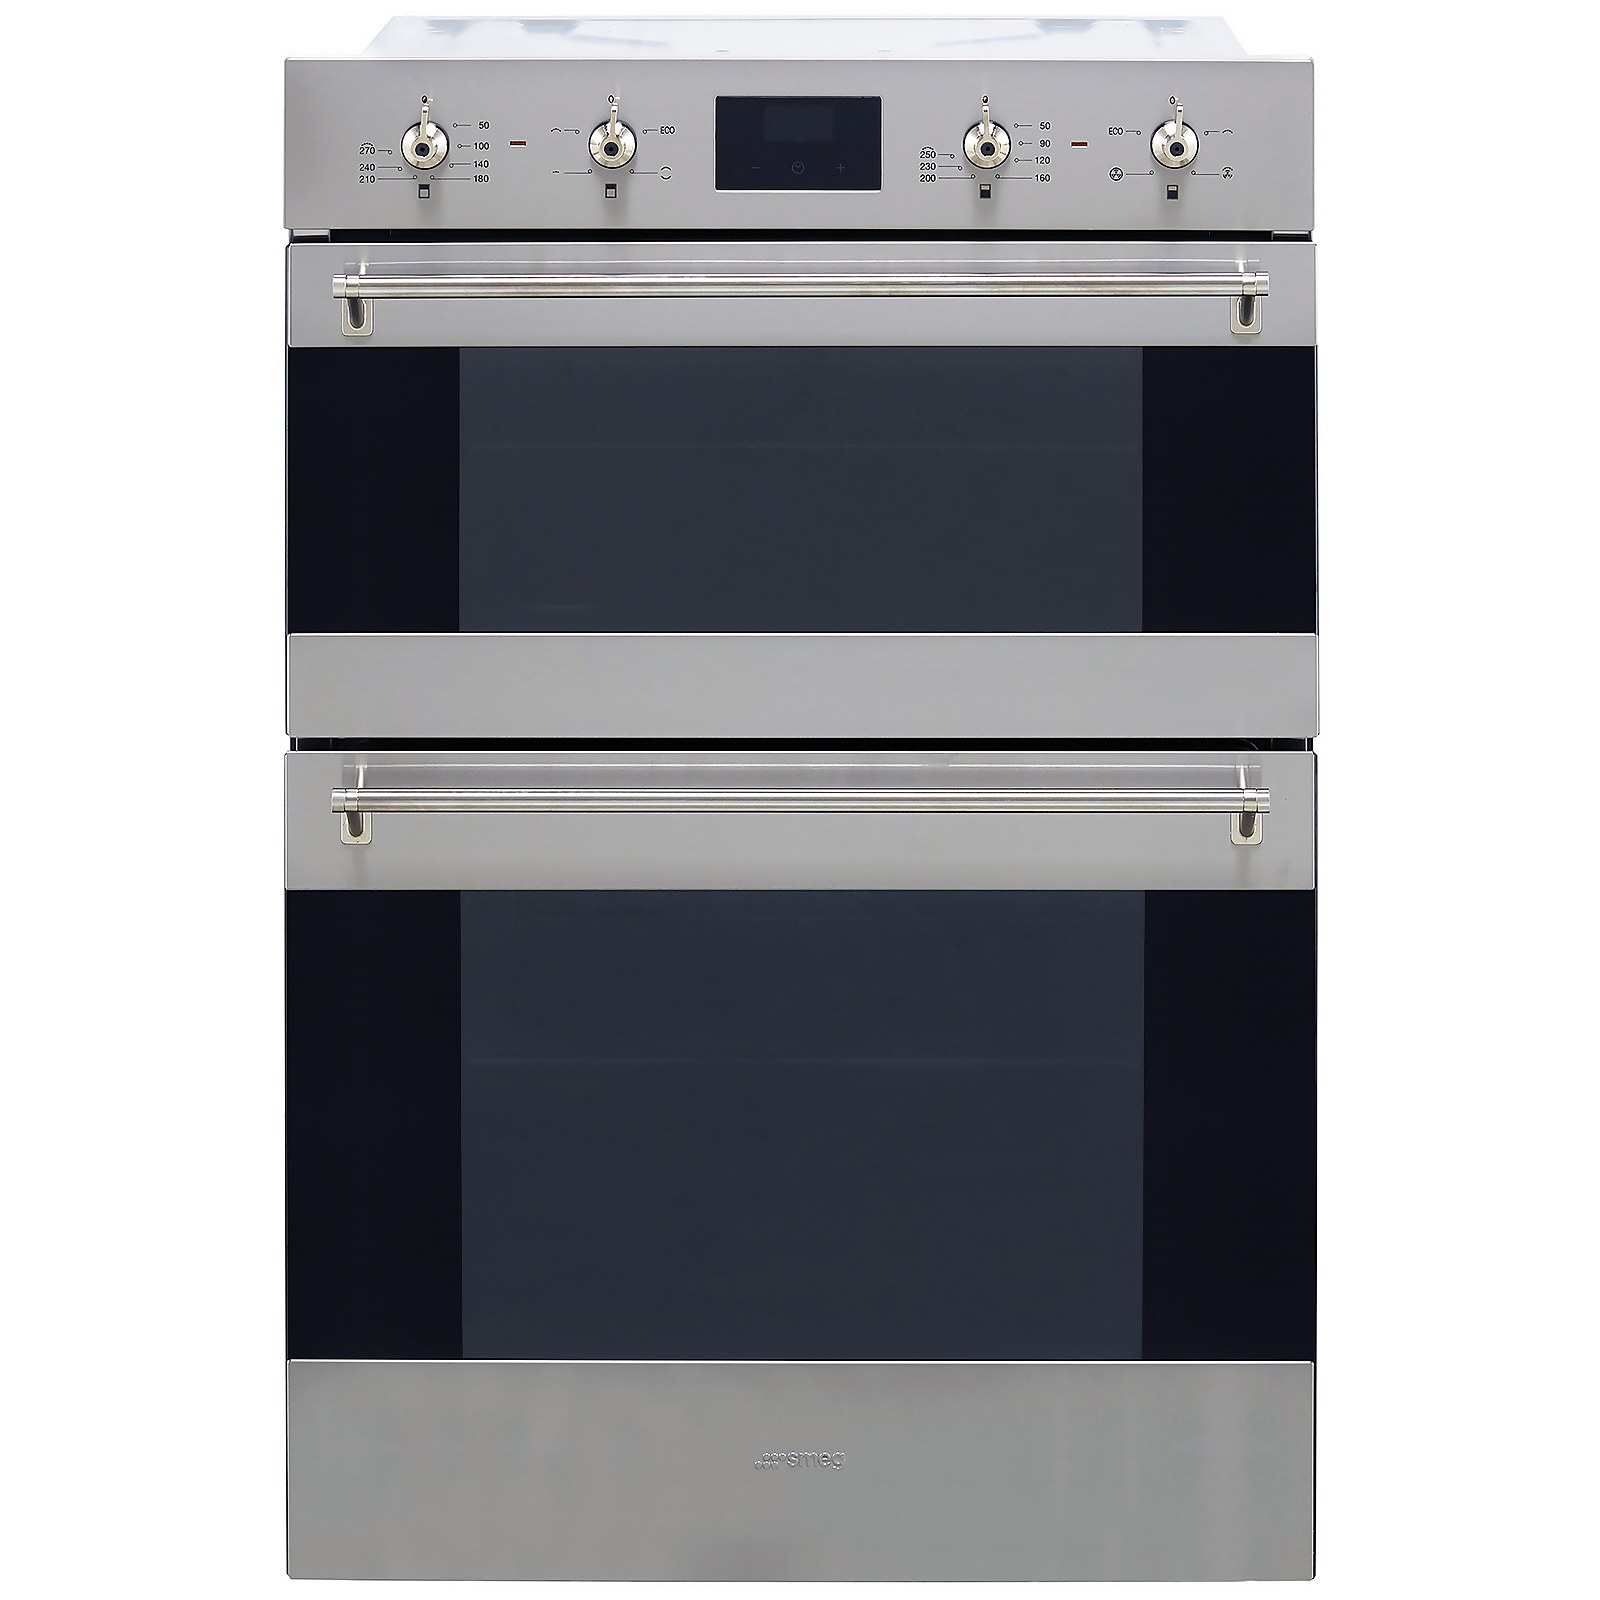 Smeg DOSF6300X Electric Double Oven - Stainless Steel